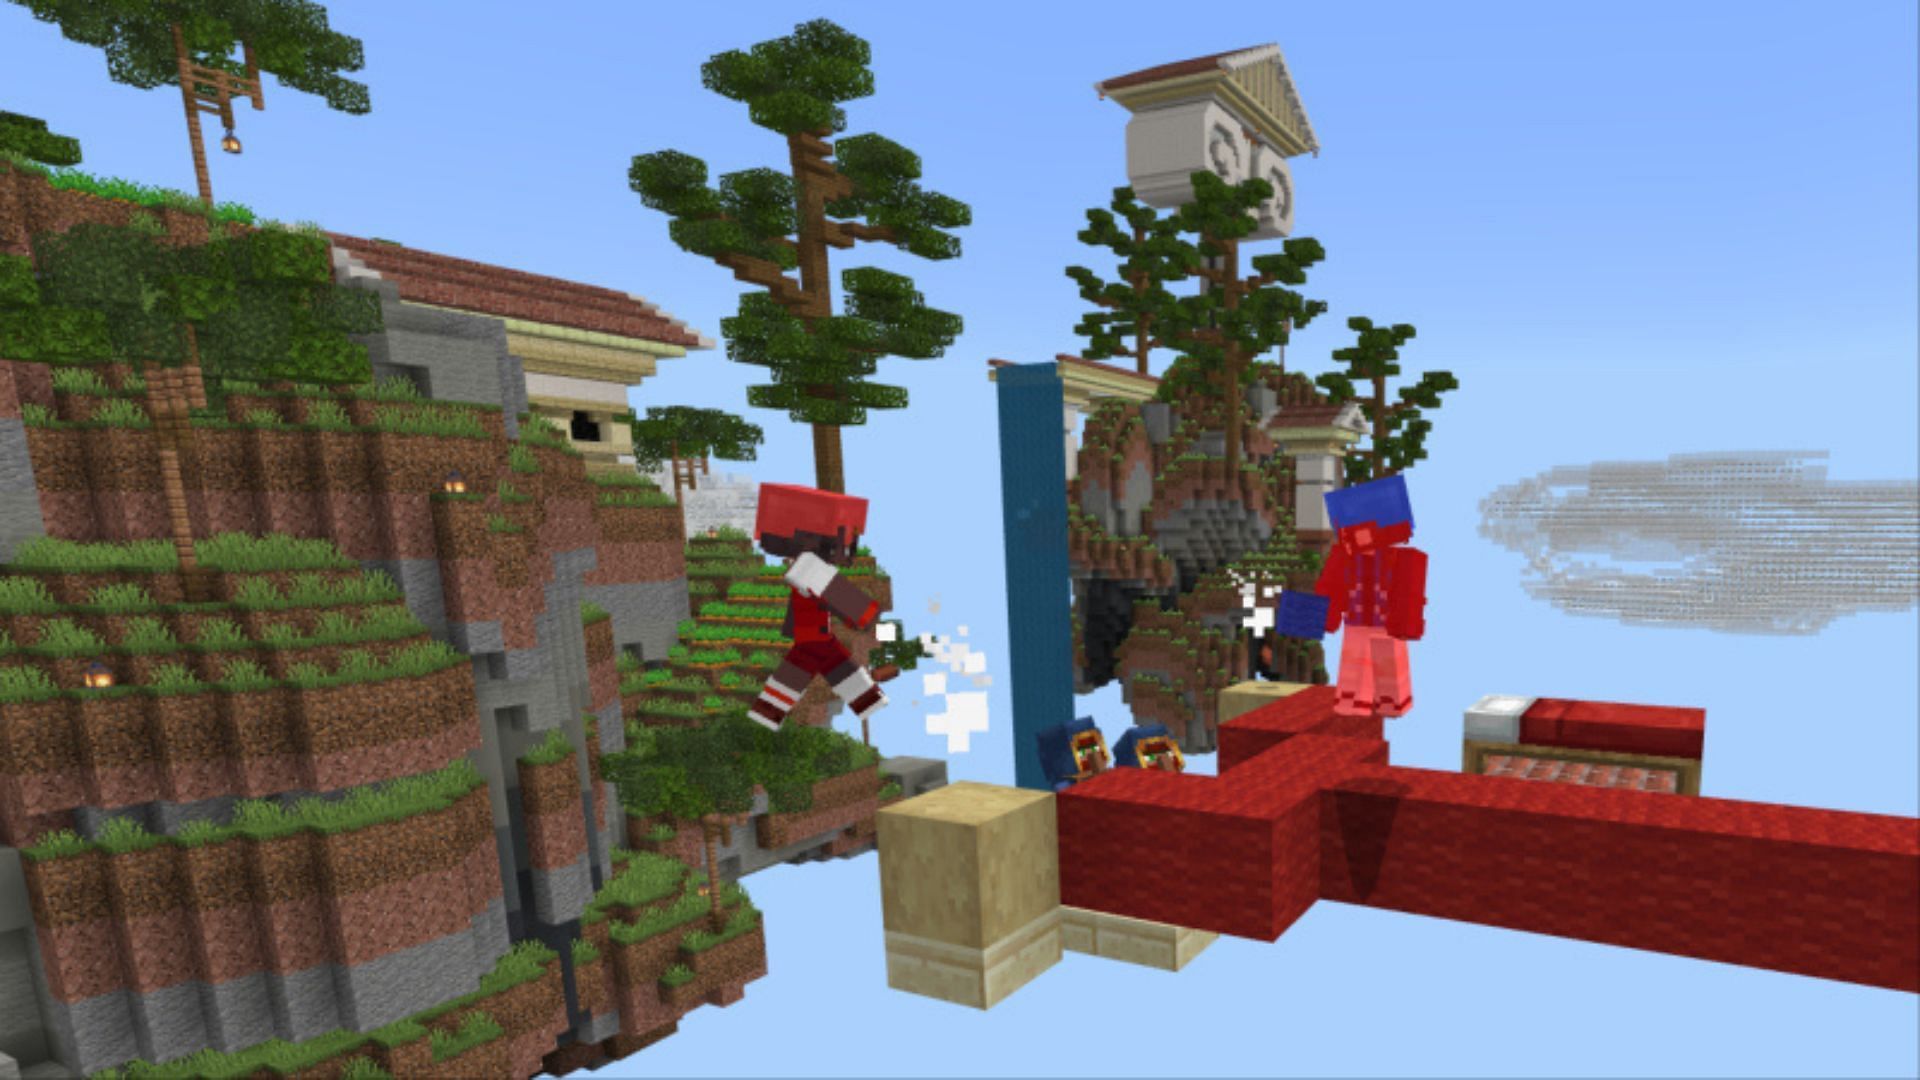 One Block Bed Wars mini-game in Minecraft Marketplace (Image via Minecraft Marketplace)